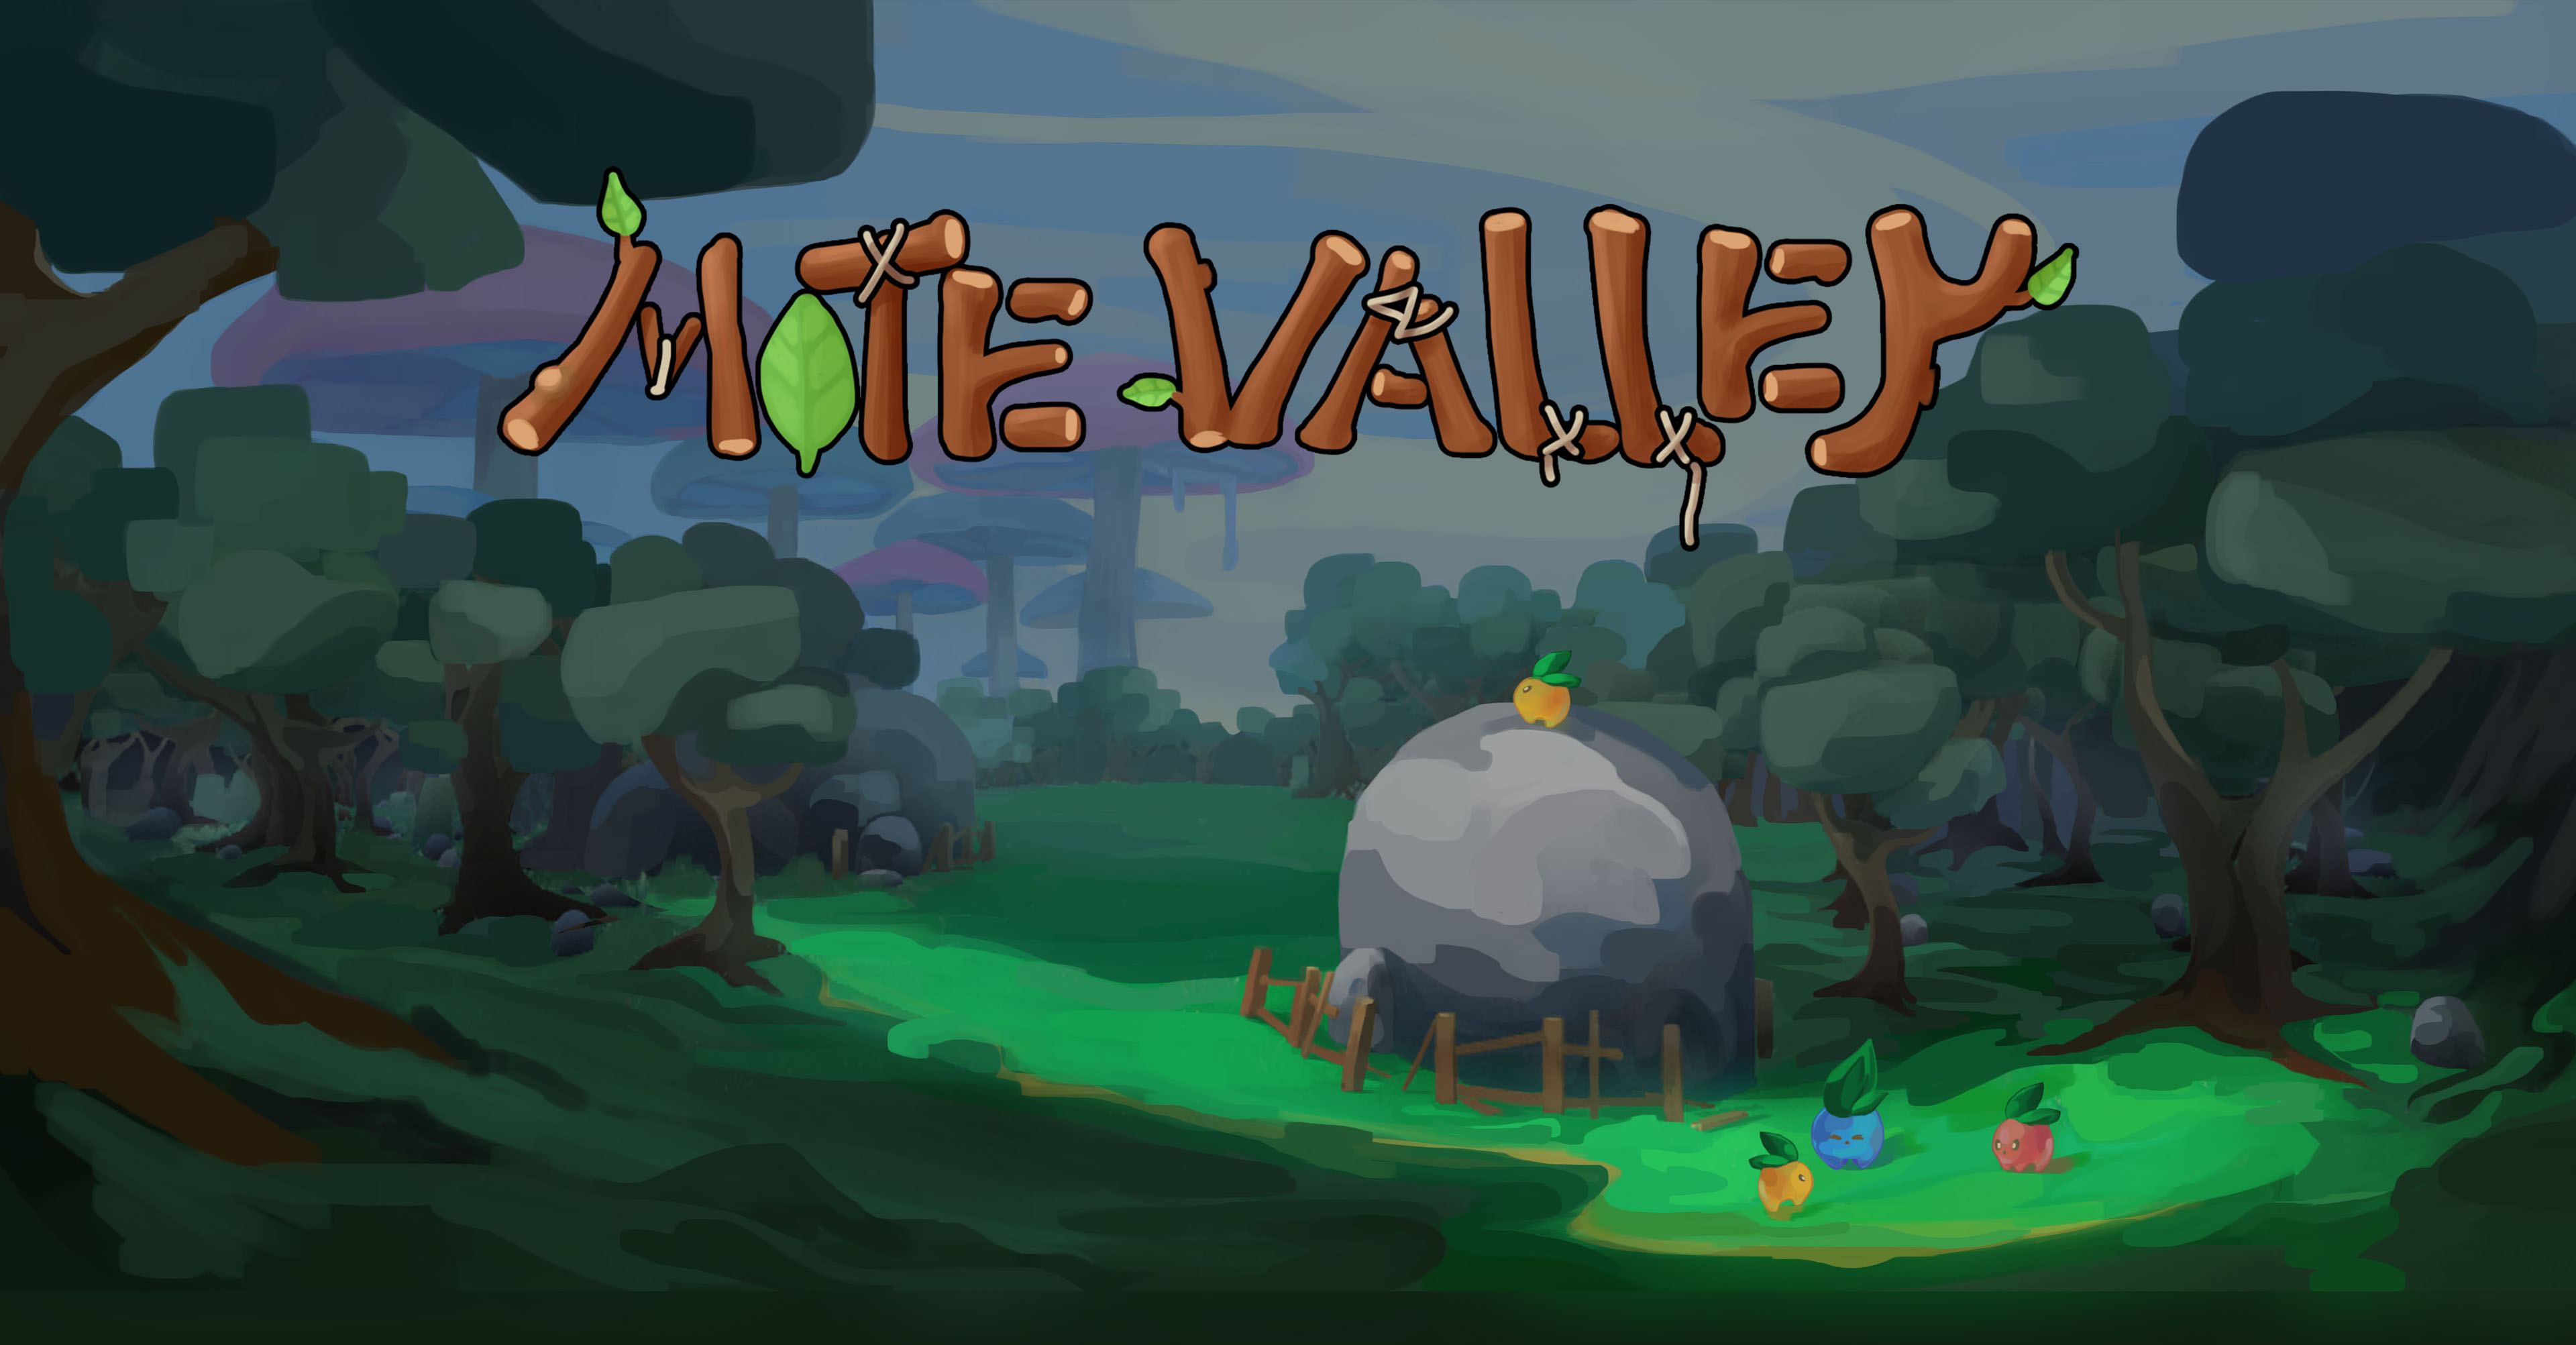 Mote Valley